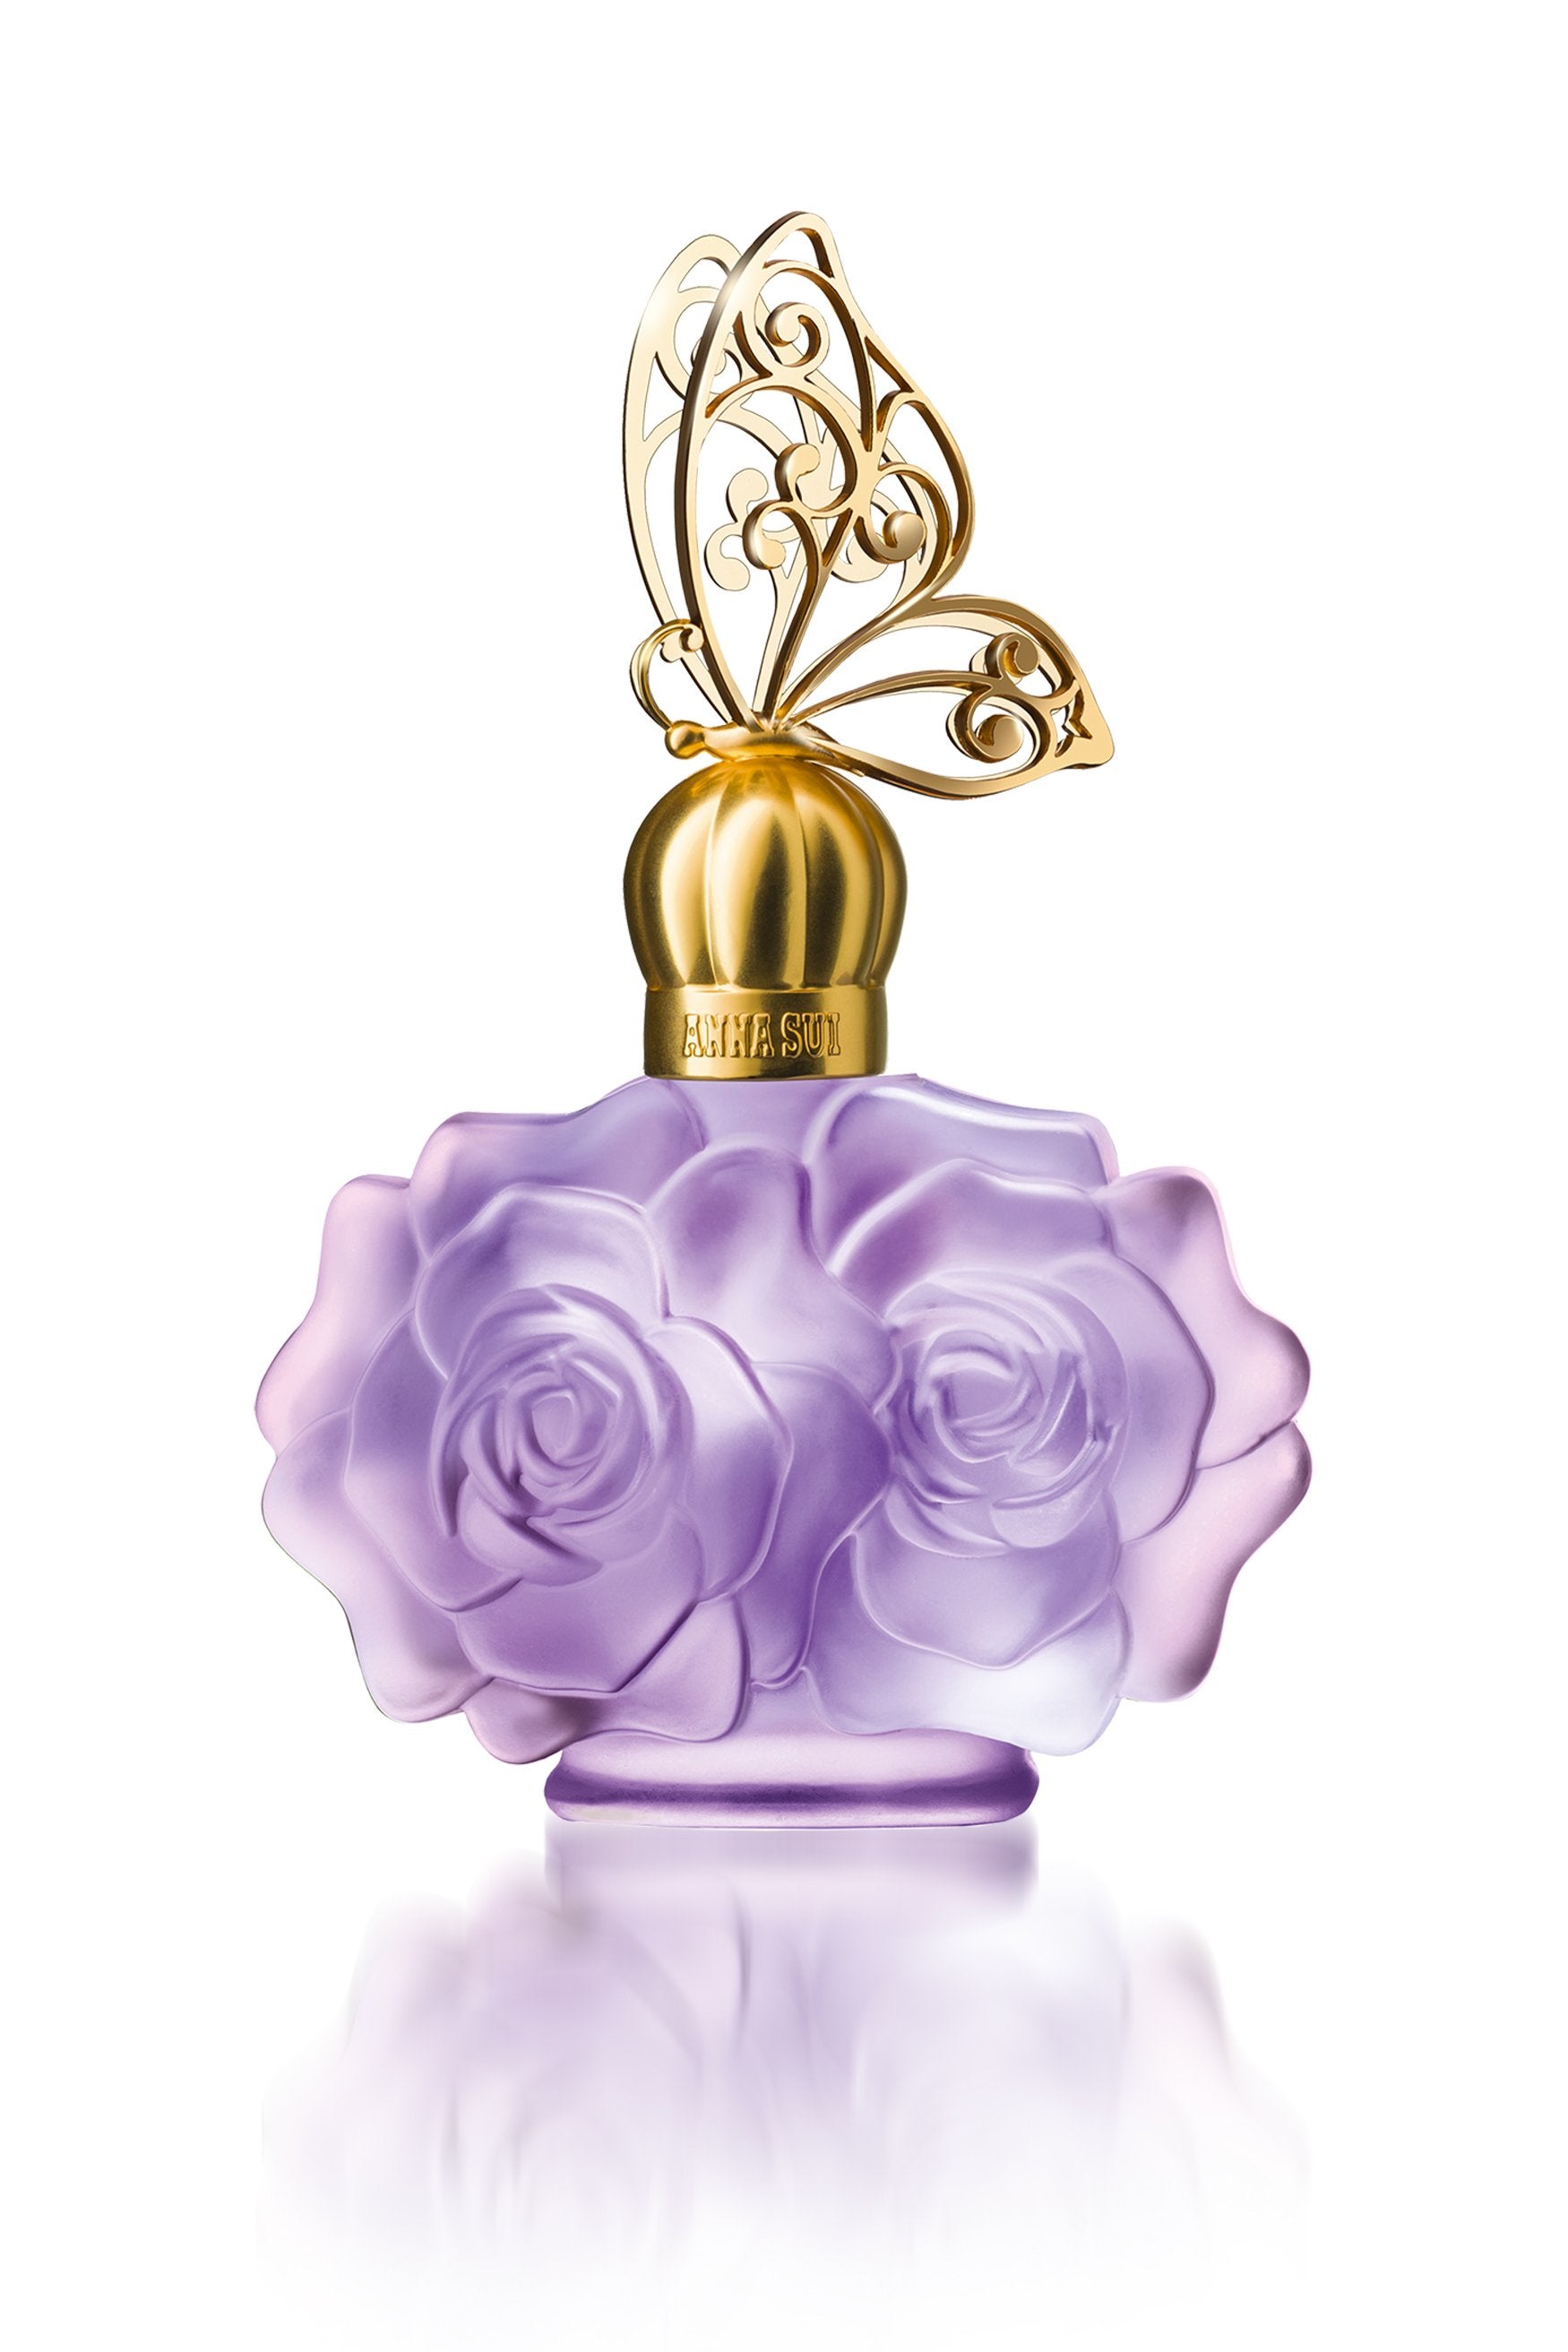 Notes, top: Turkish Rose, Sparkling Pea, Red Berries, Dragon Fruit. Mid: Red Magnolia, Purple Peony, Pink Freesia. Base: Electric White Woods, Sheer Musk, Tart Raspberry, Vanilla and Sandalwood, Accord.